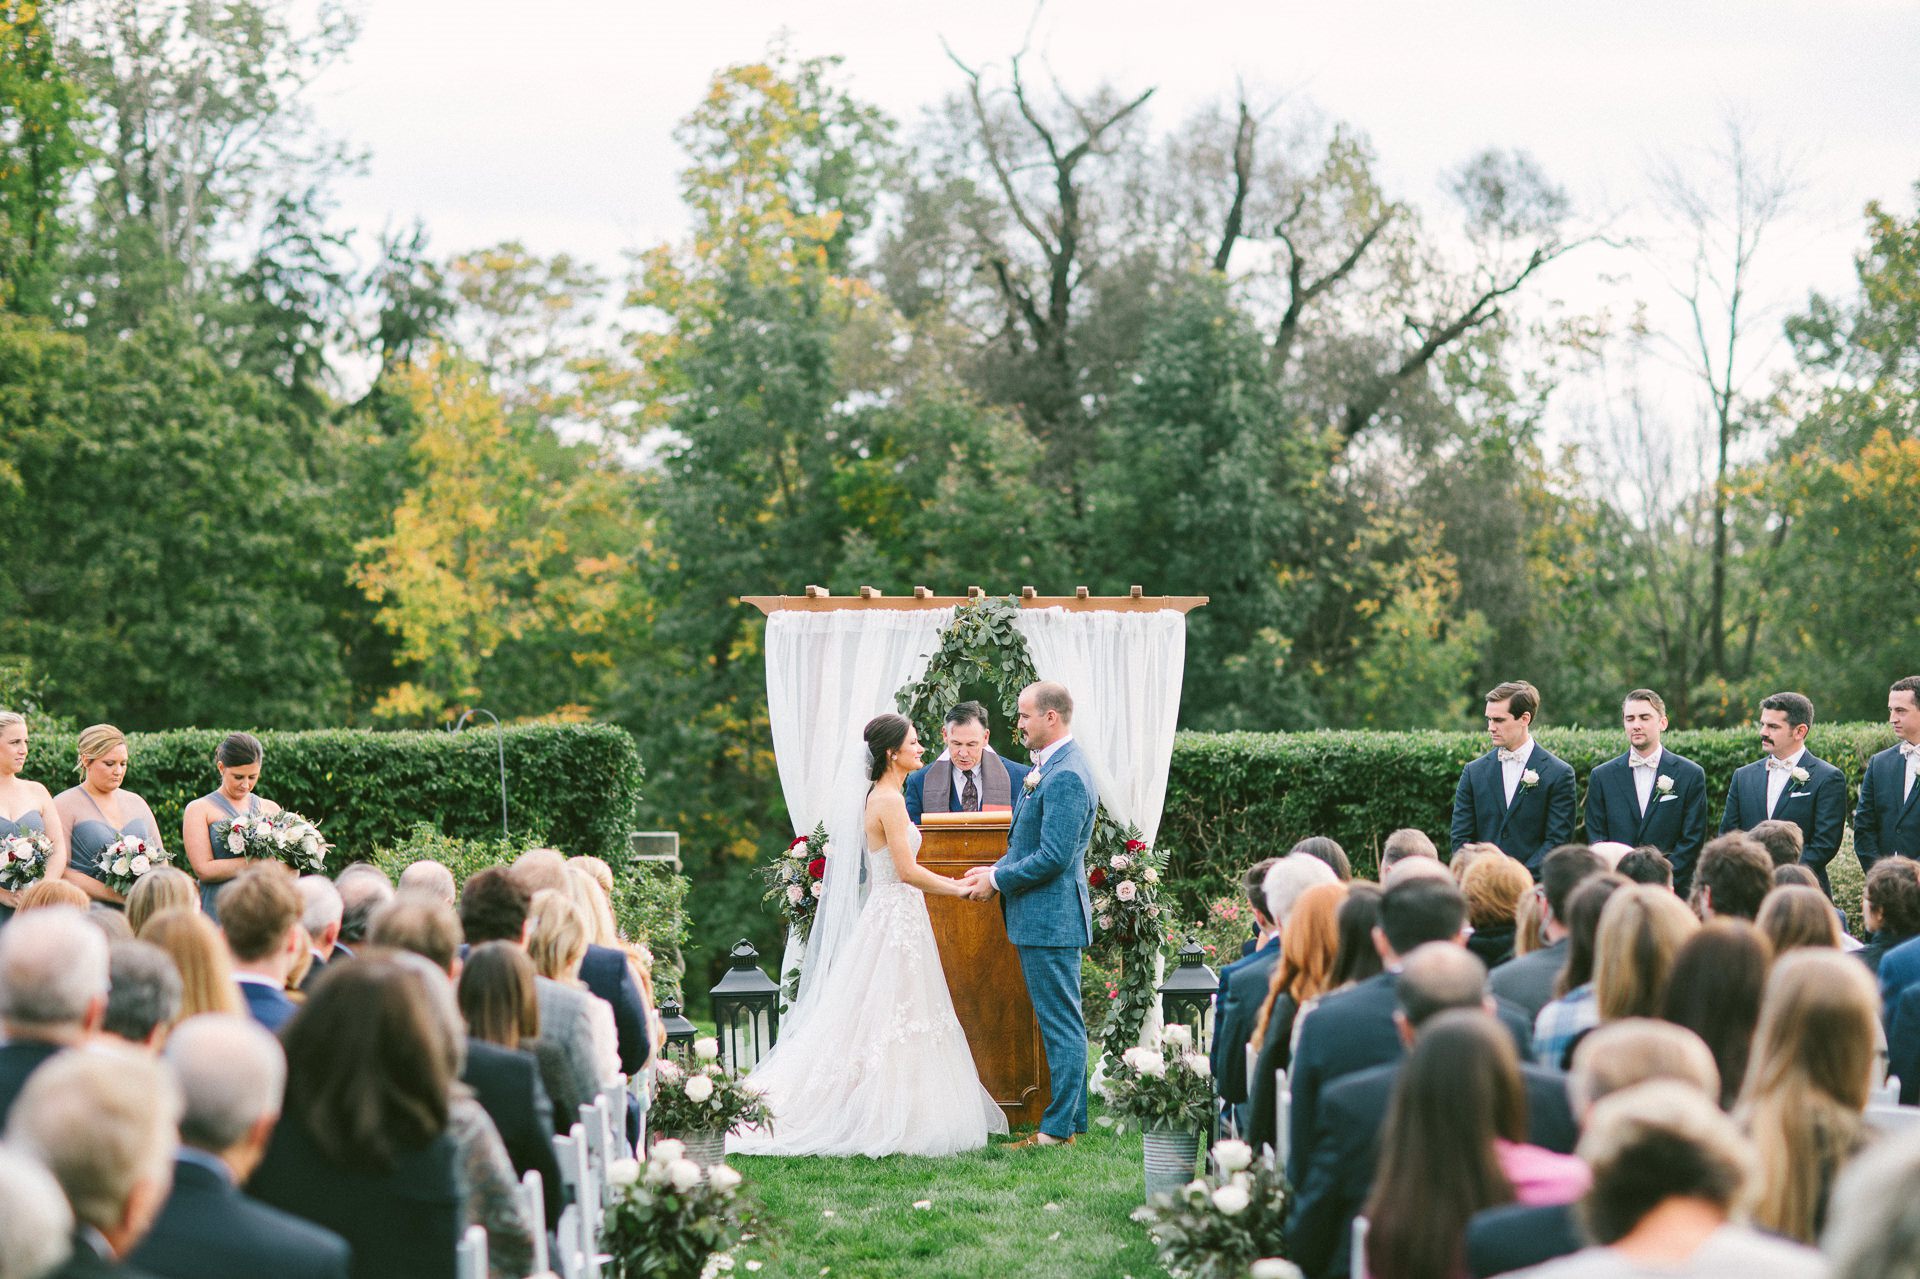 Wedding at Kirtland Country Club in Willoughby 3 5.jpg